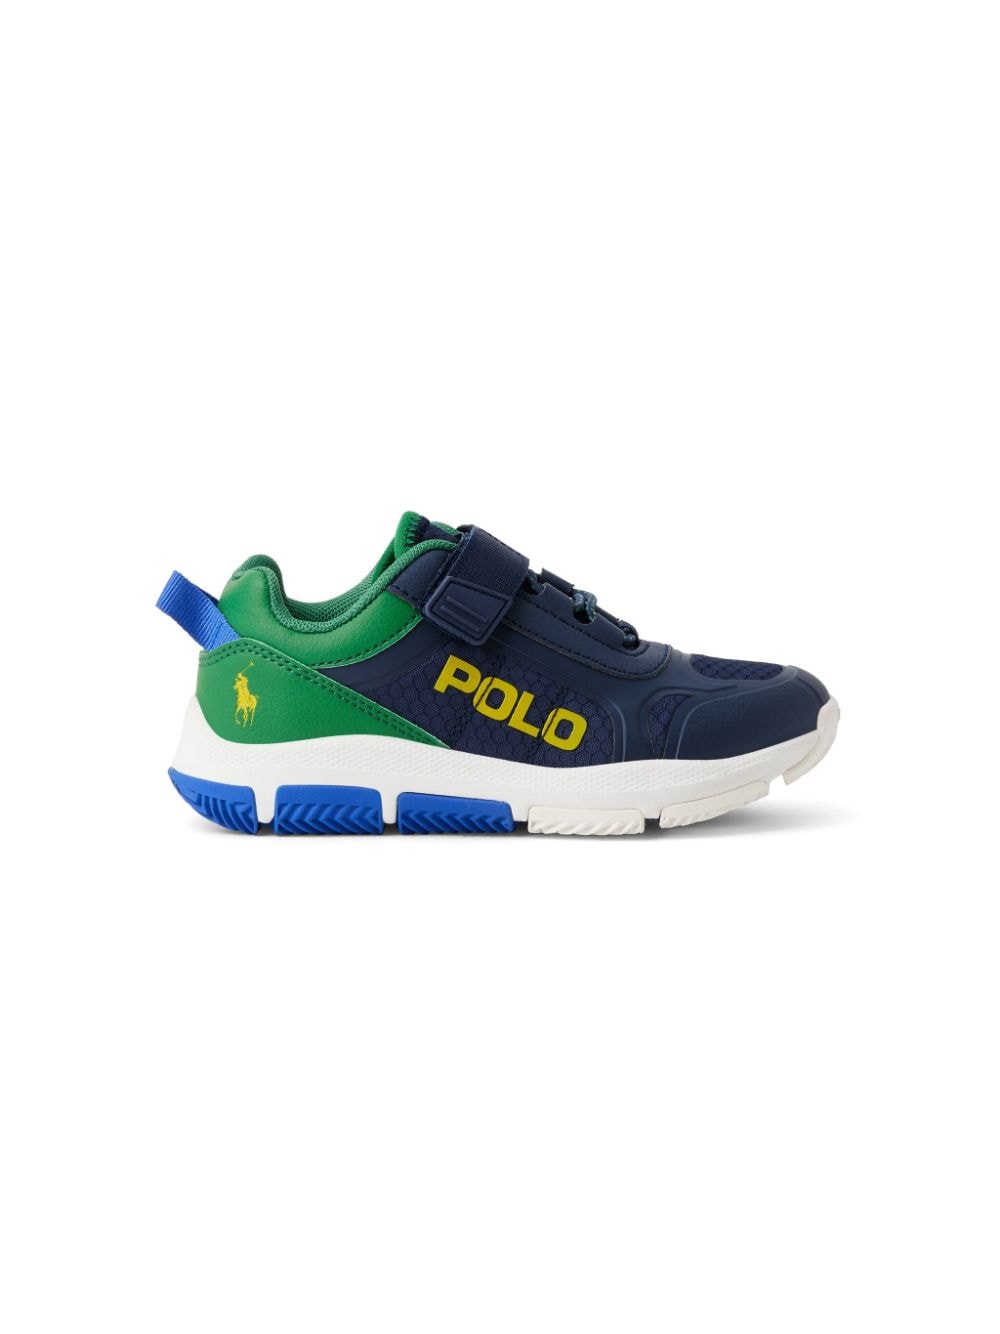 Polo Ralph Lauren Kids' Polo Pony Panelled Sneakers In Blue